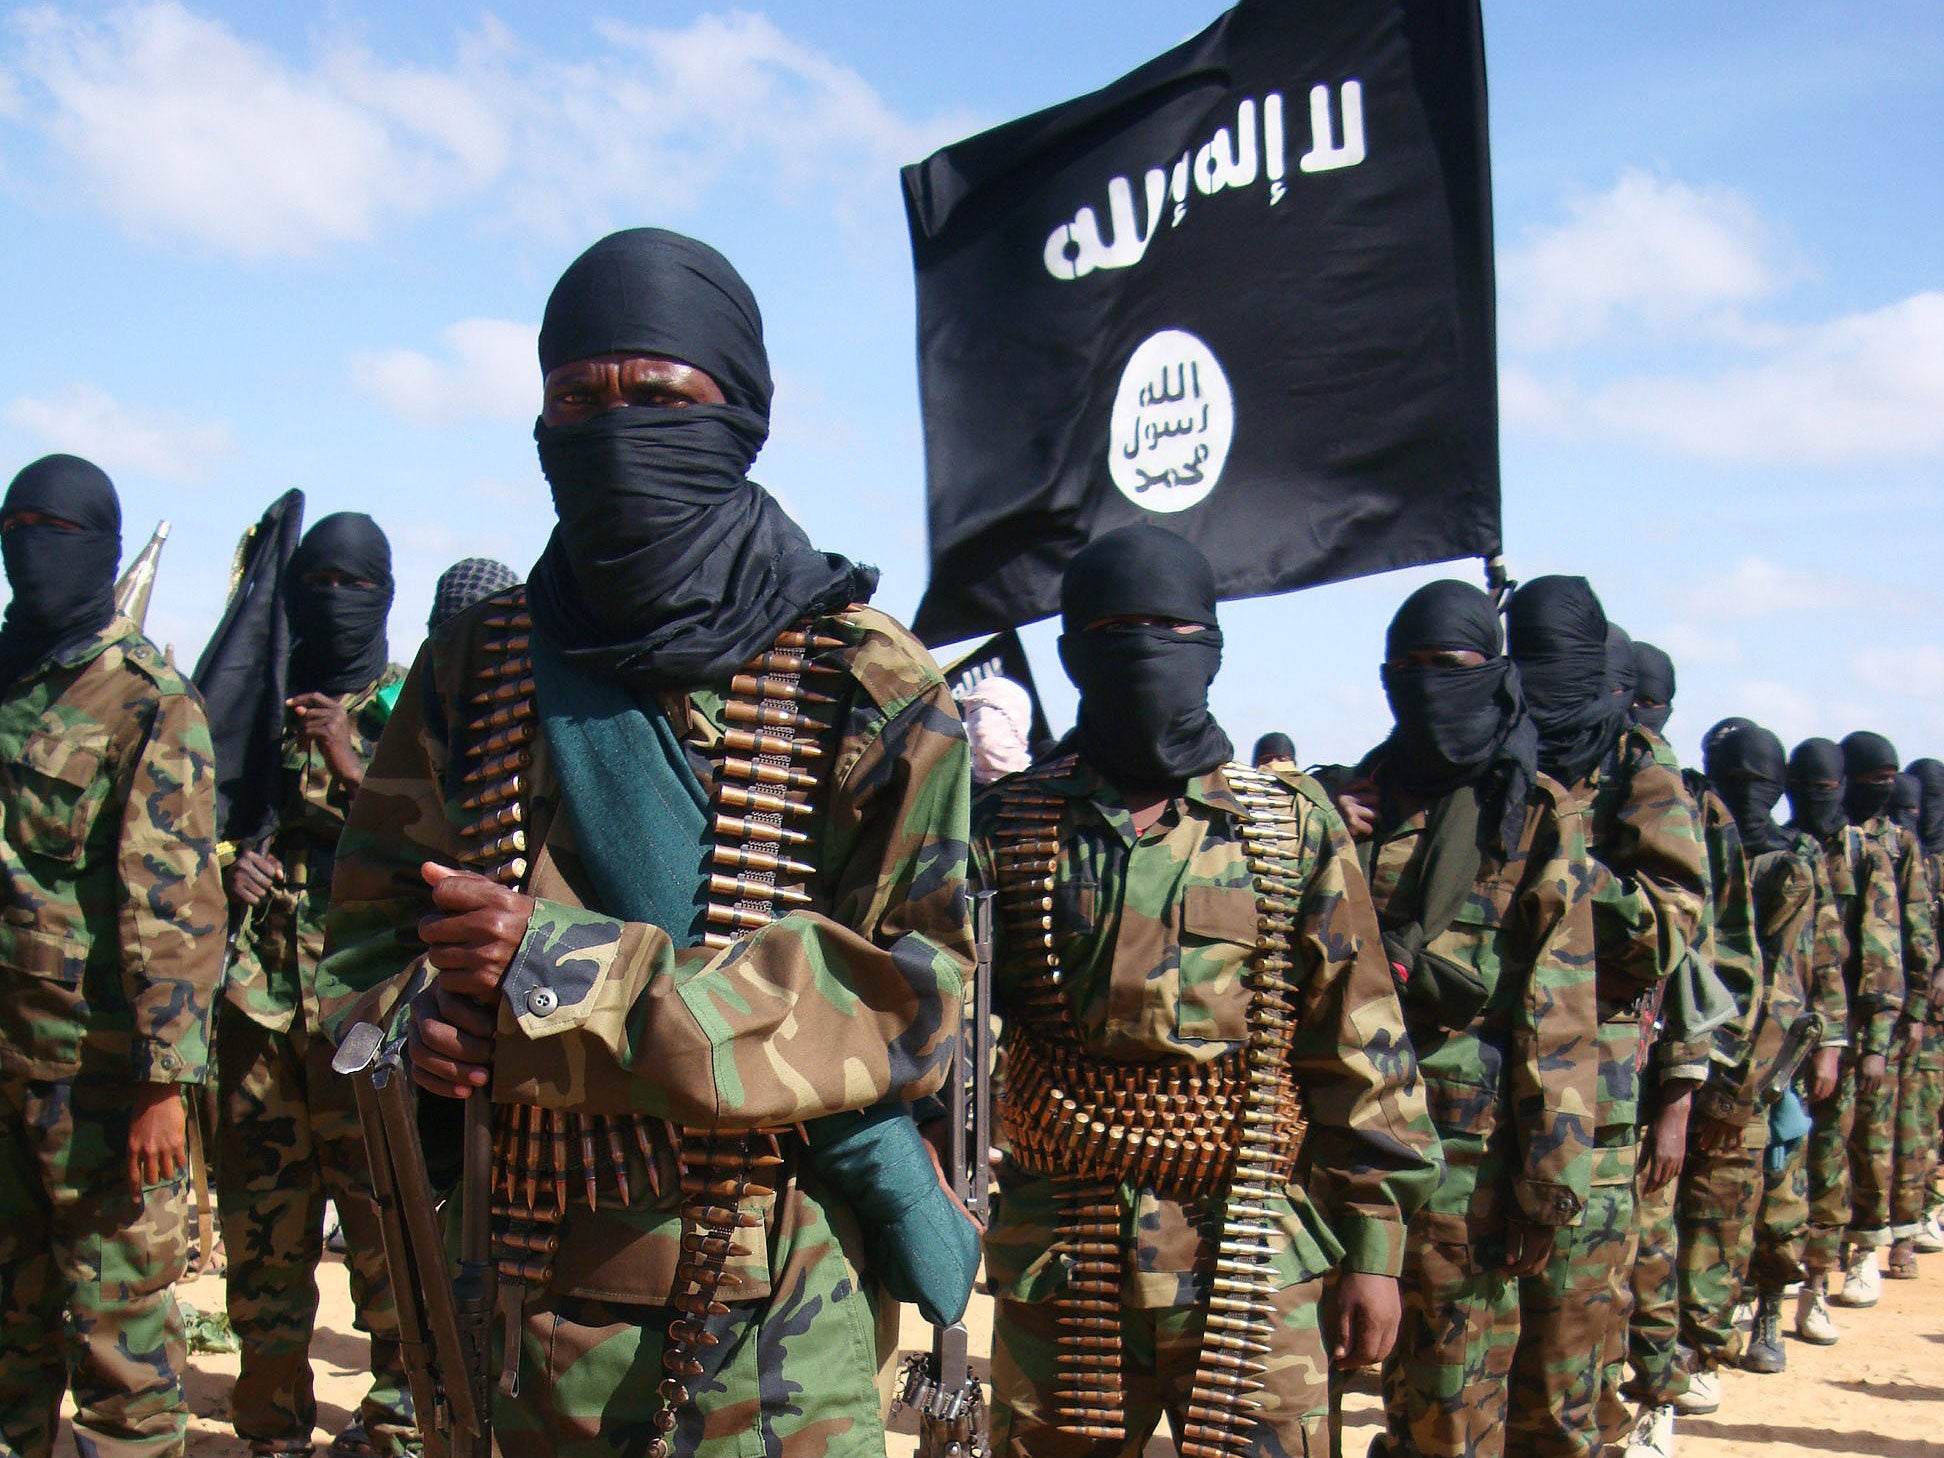 Isis and al-Qaeda have groups competing across the world, including al-Qaeda affiliate al-Shabaab (pictured)